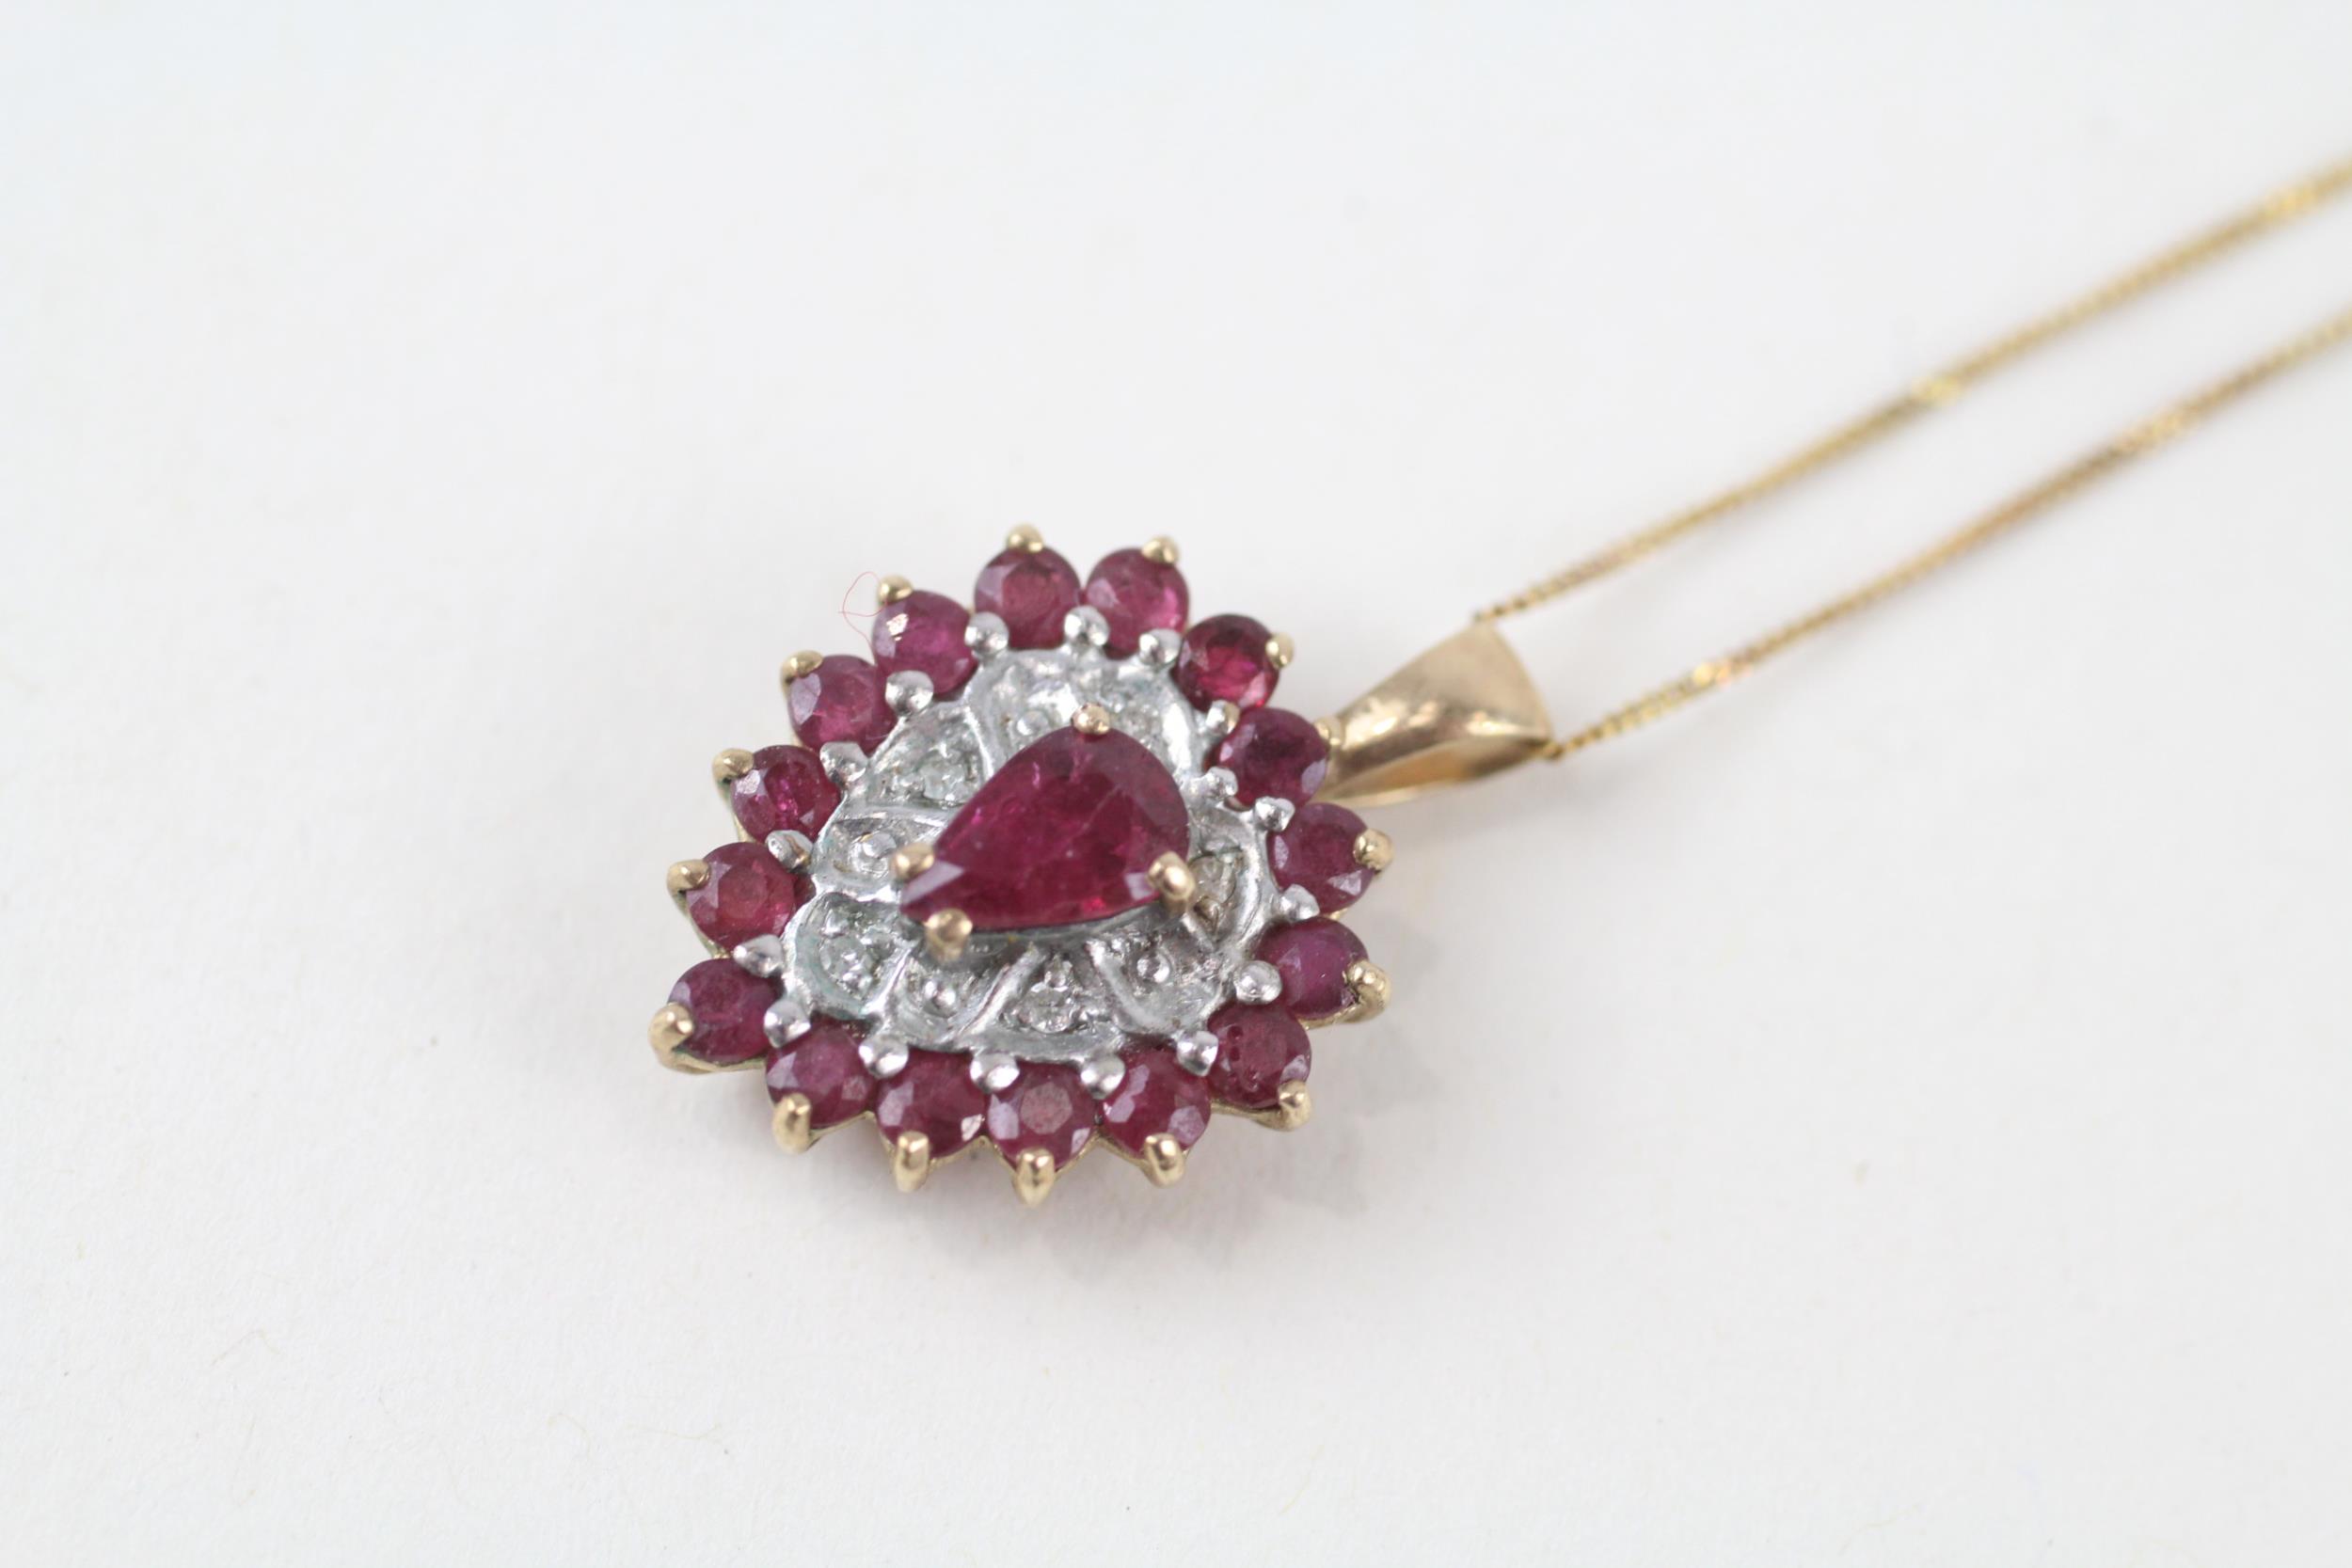 9ct gold ruby & diamond heart shaped pendant & chain (2.5g) - Image 2 of 4